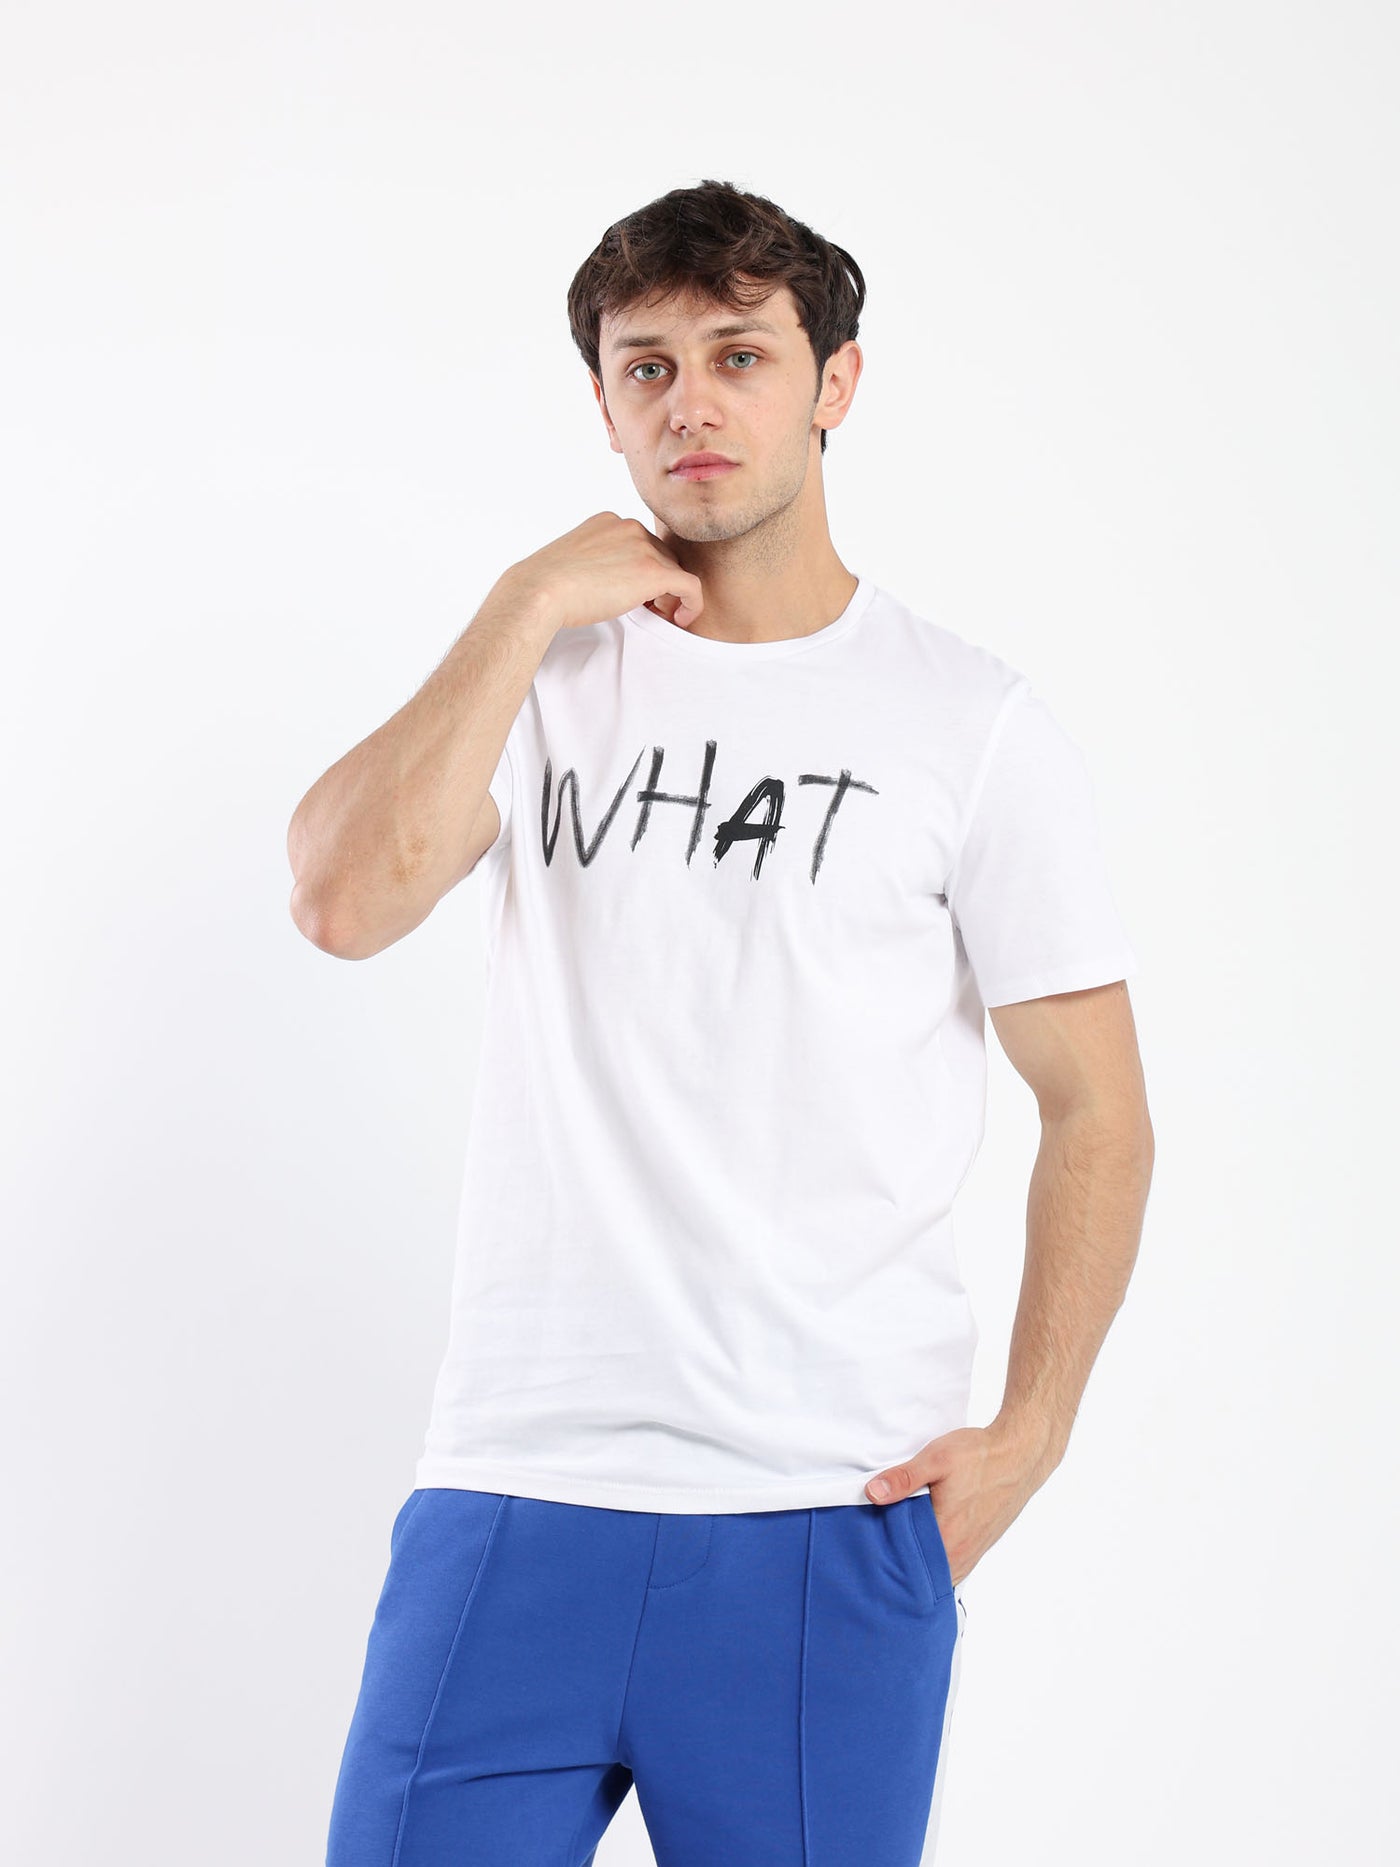 T-Shirt - "What" Front Print - Round Neck